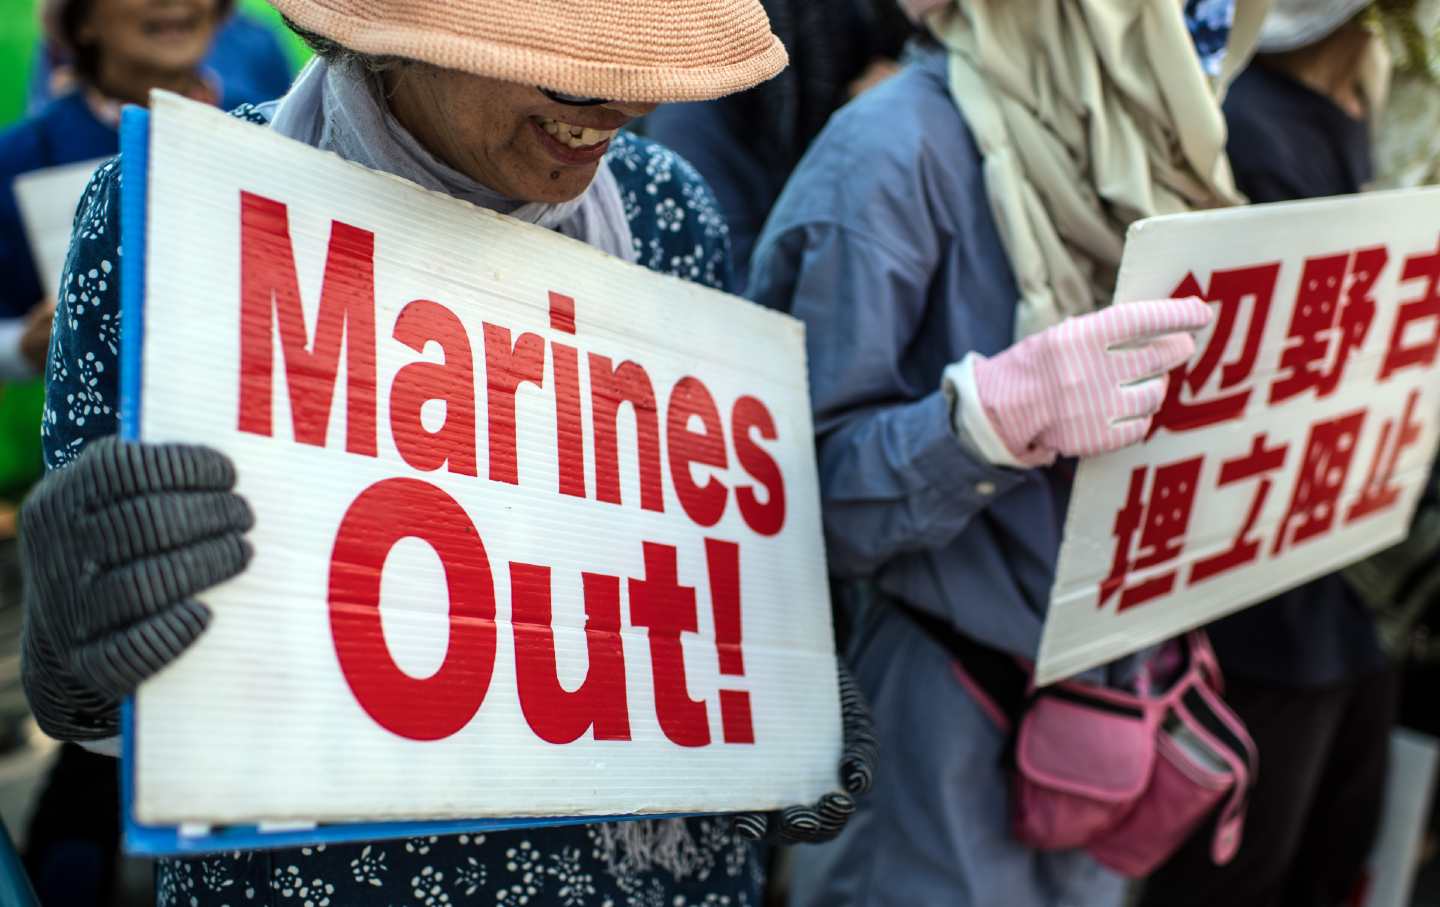 Marines Out